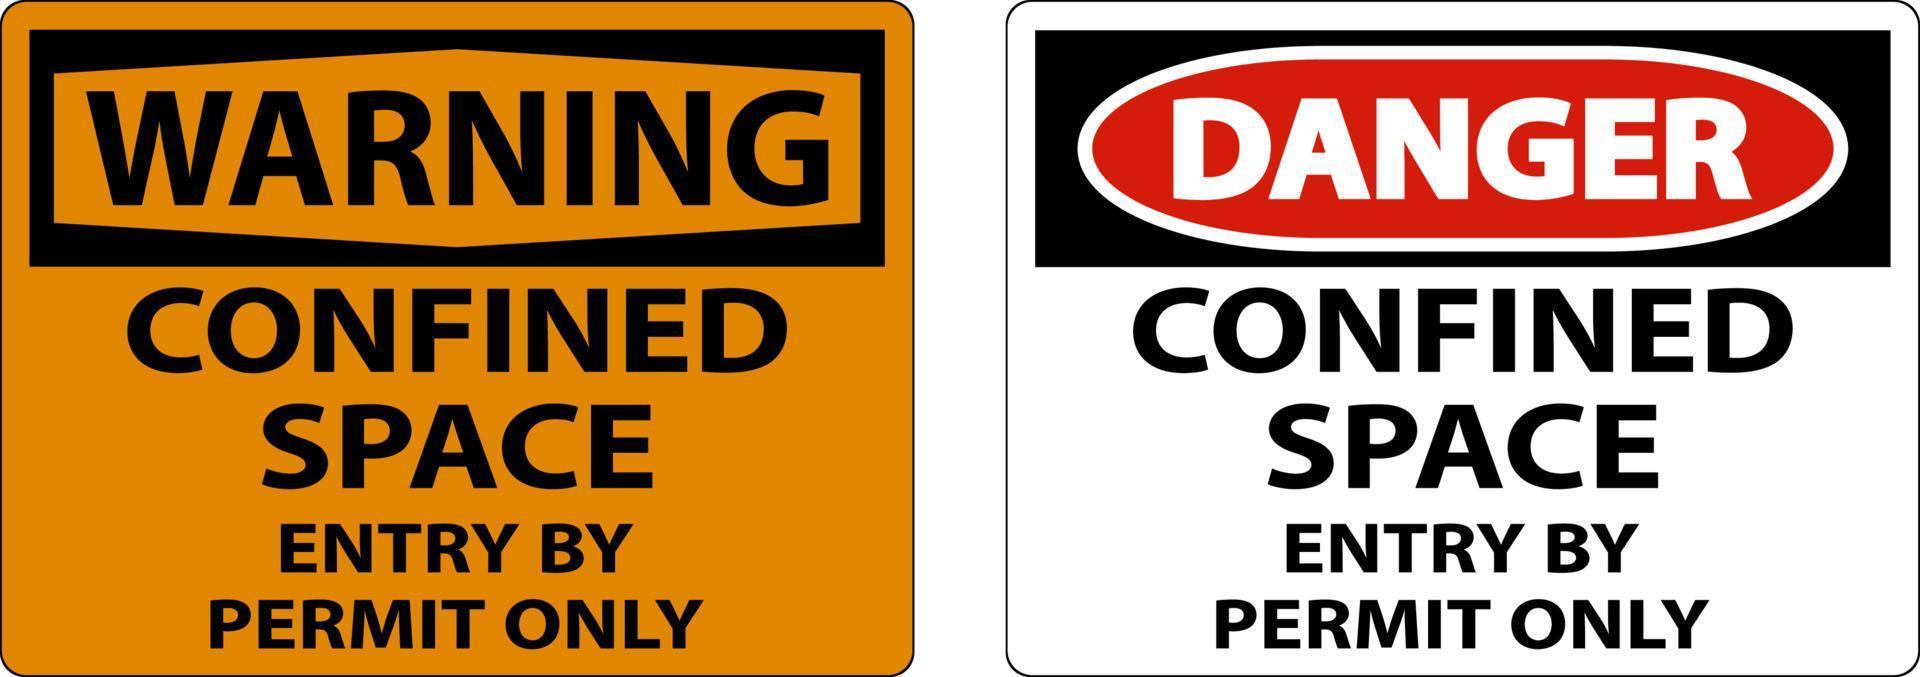 Confined Space Entry By Permit Only Sign vector